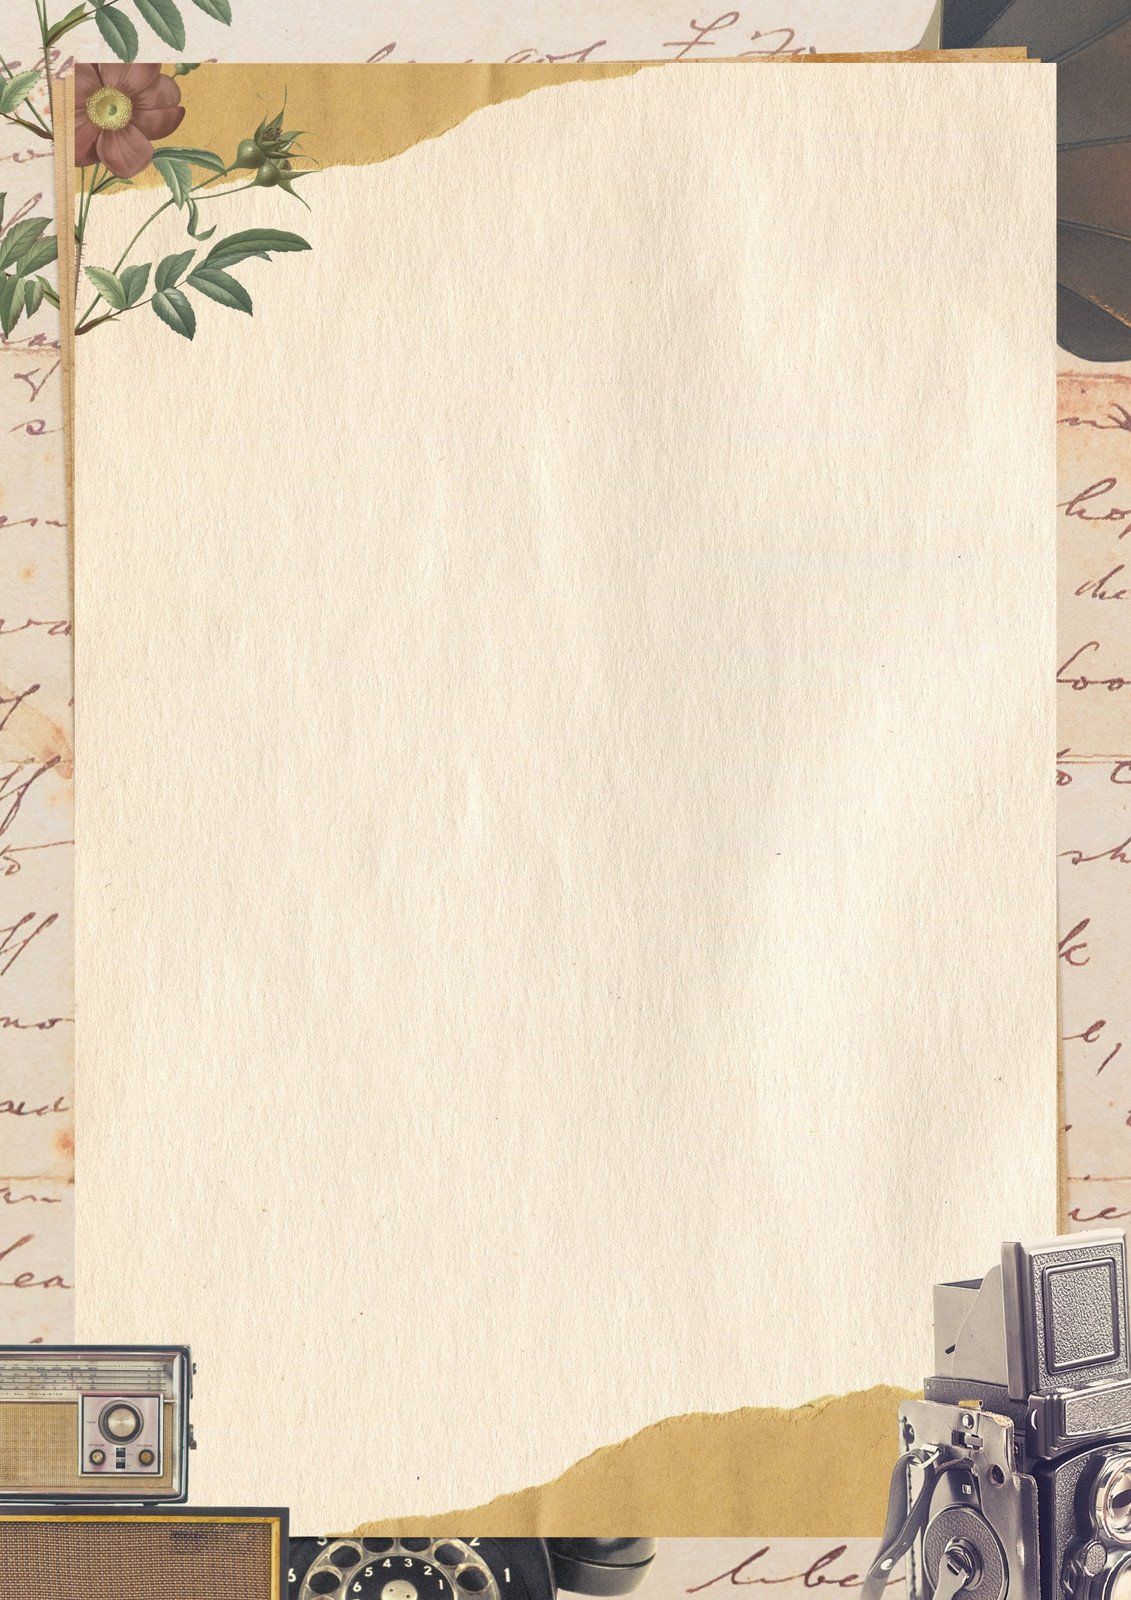 A vintage paper background with old cameras - Border